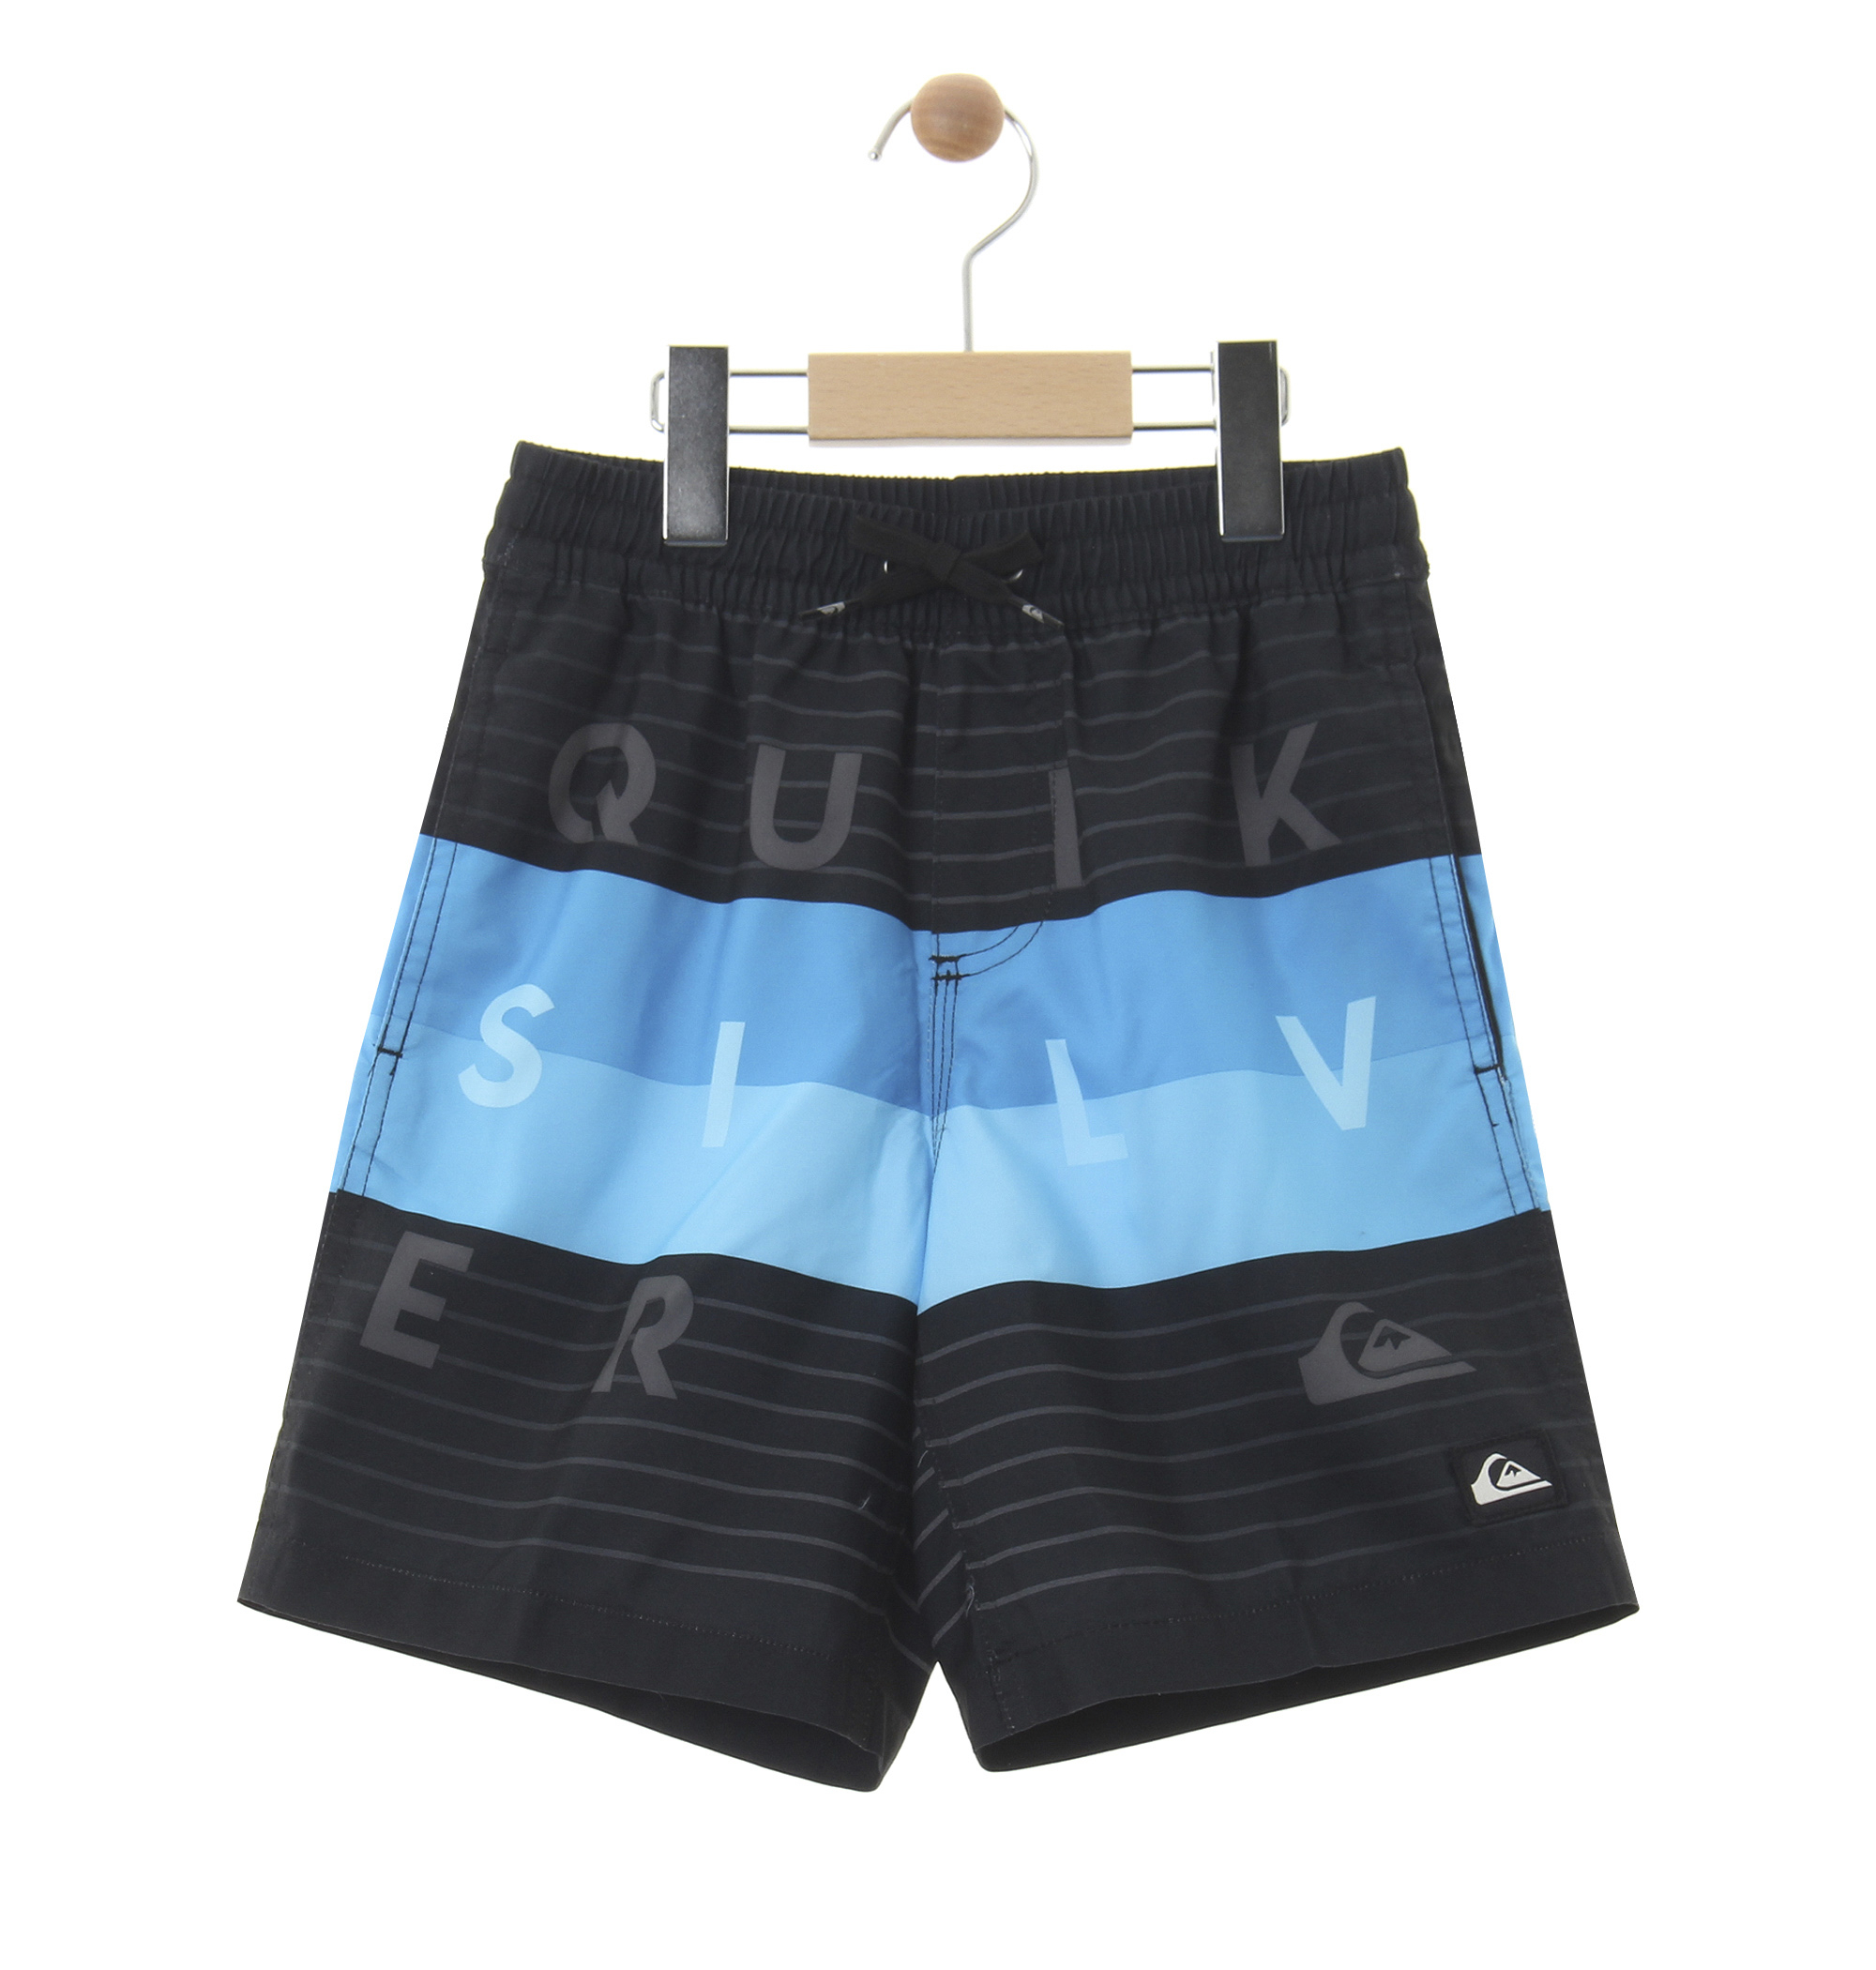 ＜Quiksilver＞ WORD BLOCK VOLLEY YOUTH 17 両サイドとバックにポケットを備えたボードショーツ